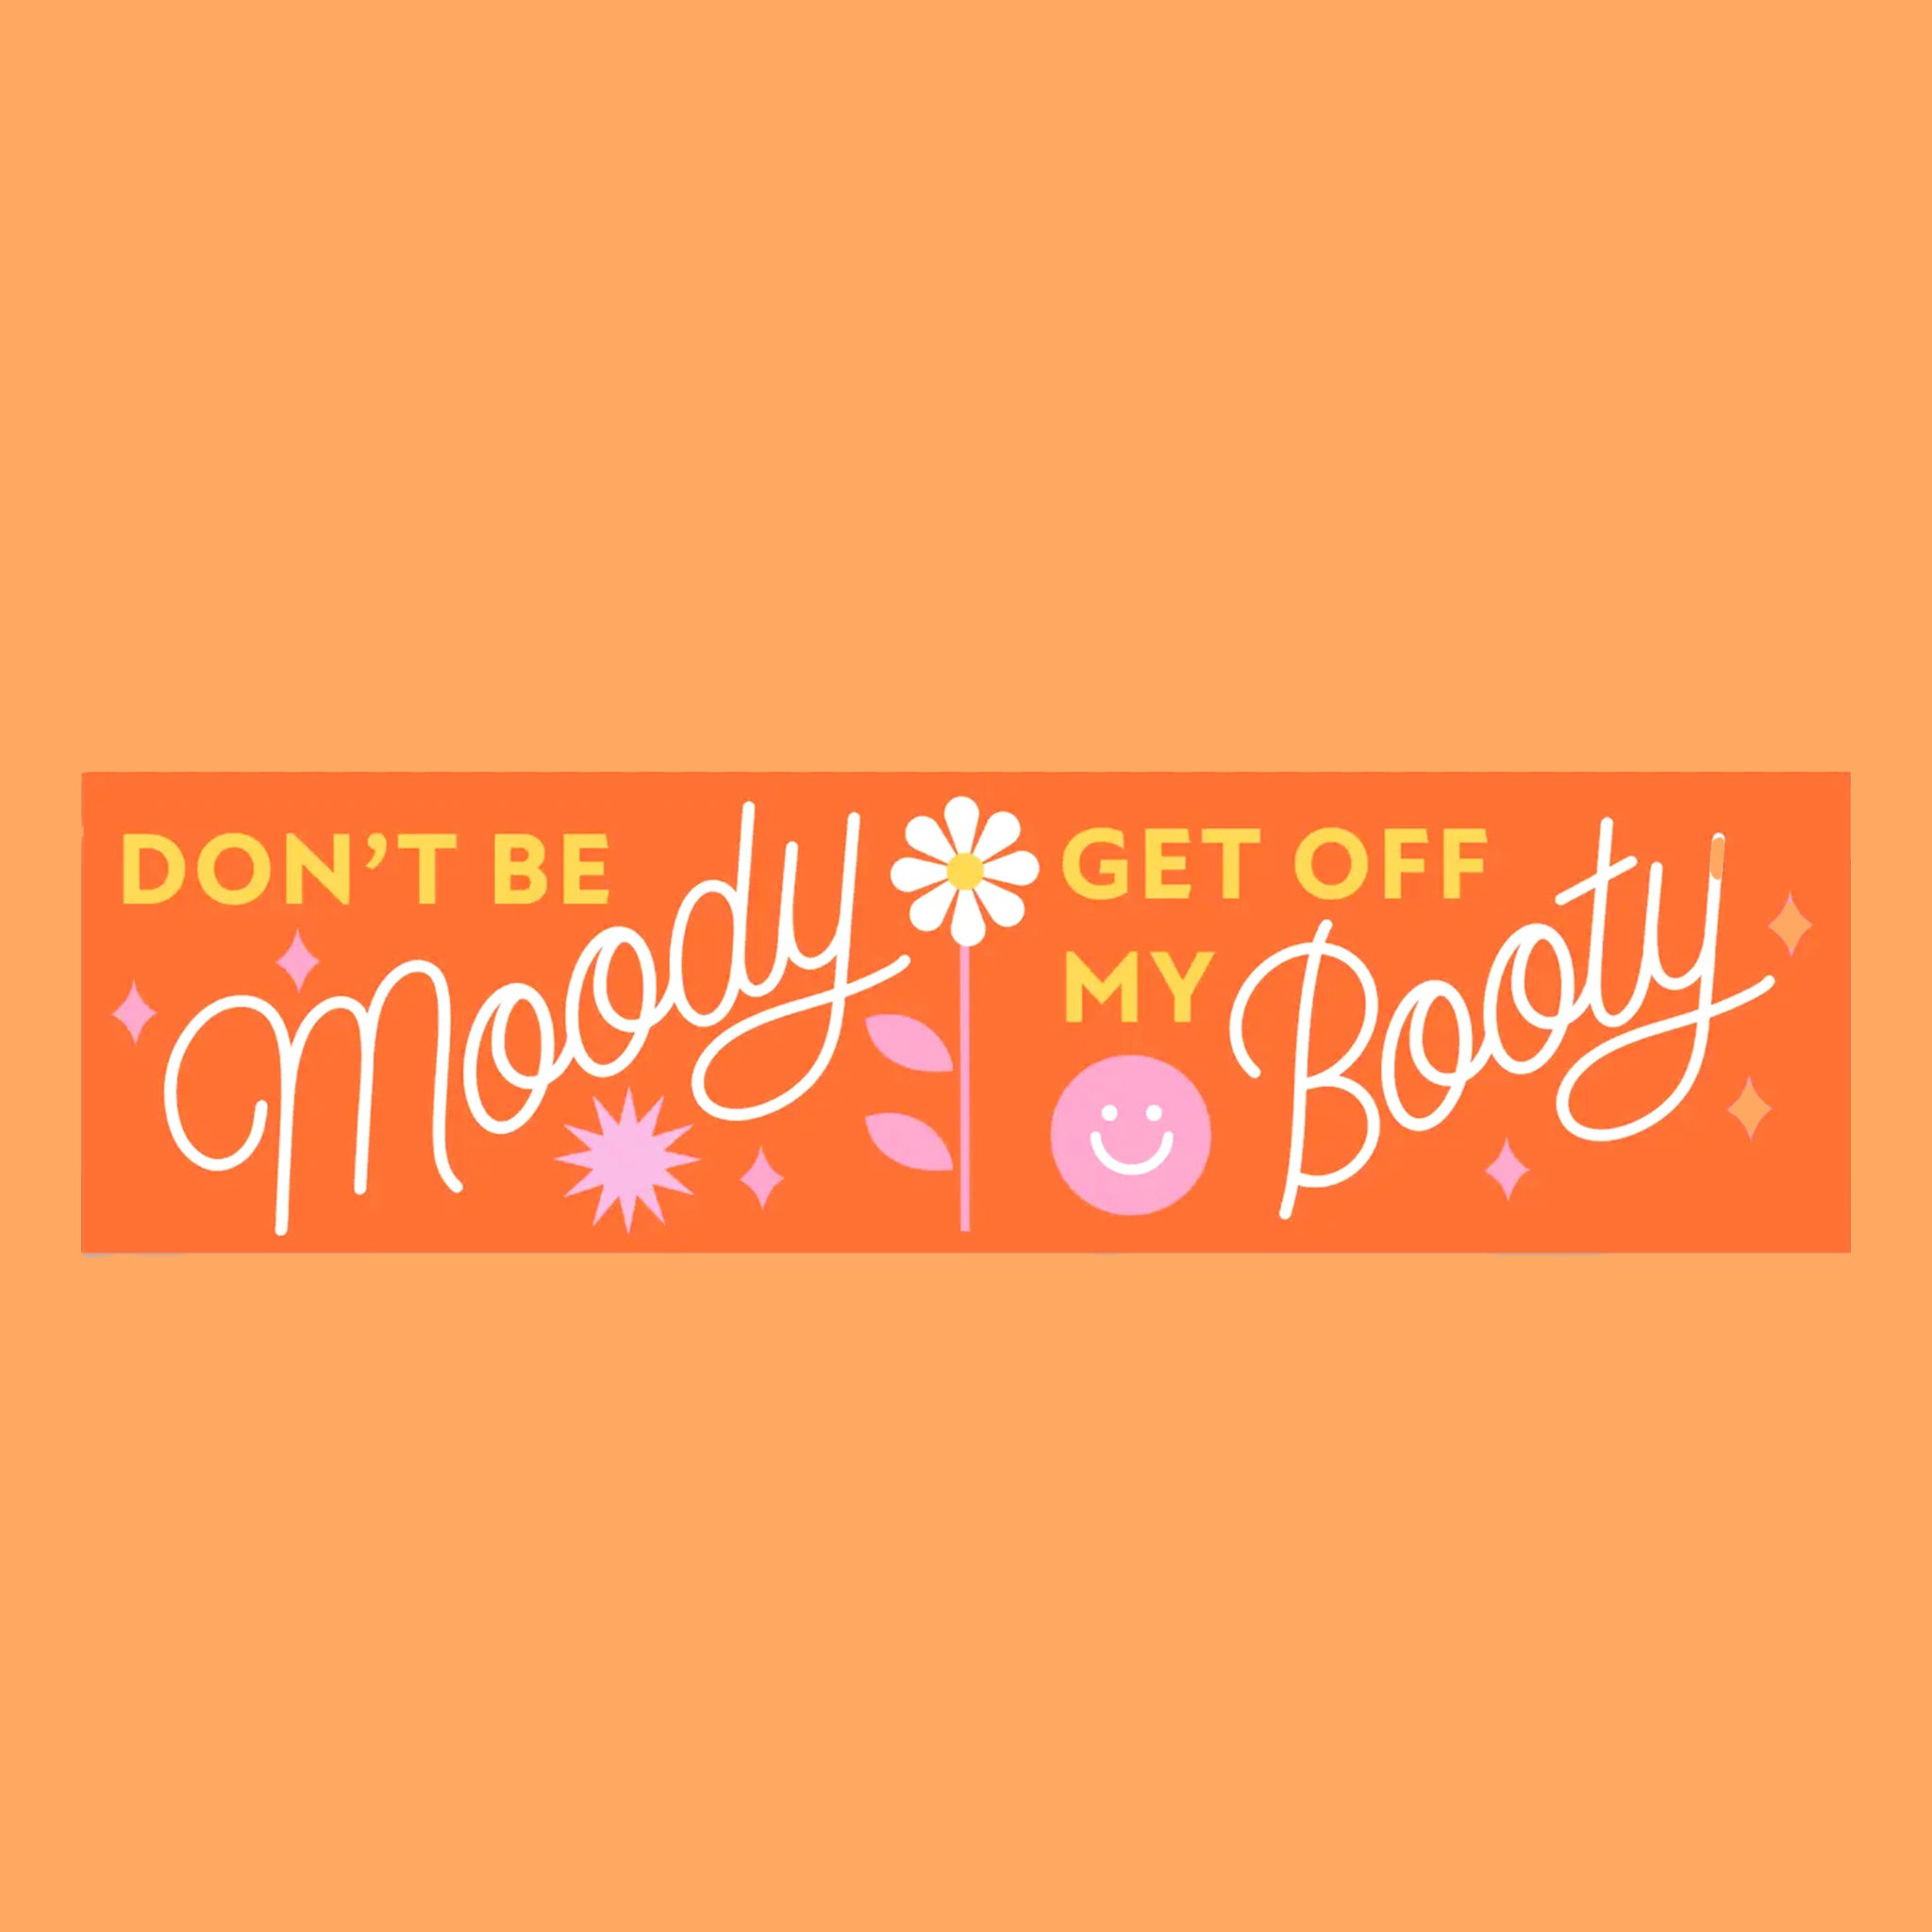 On an orange background is an orange bumper that reads, "Don't Be Moody Get Off My Booty" and a smiley face and flower graphic.